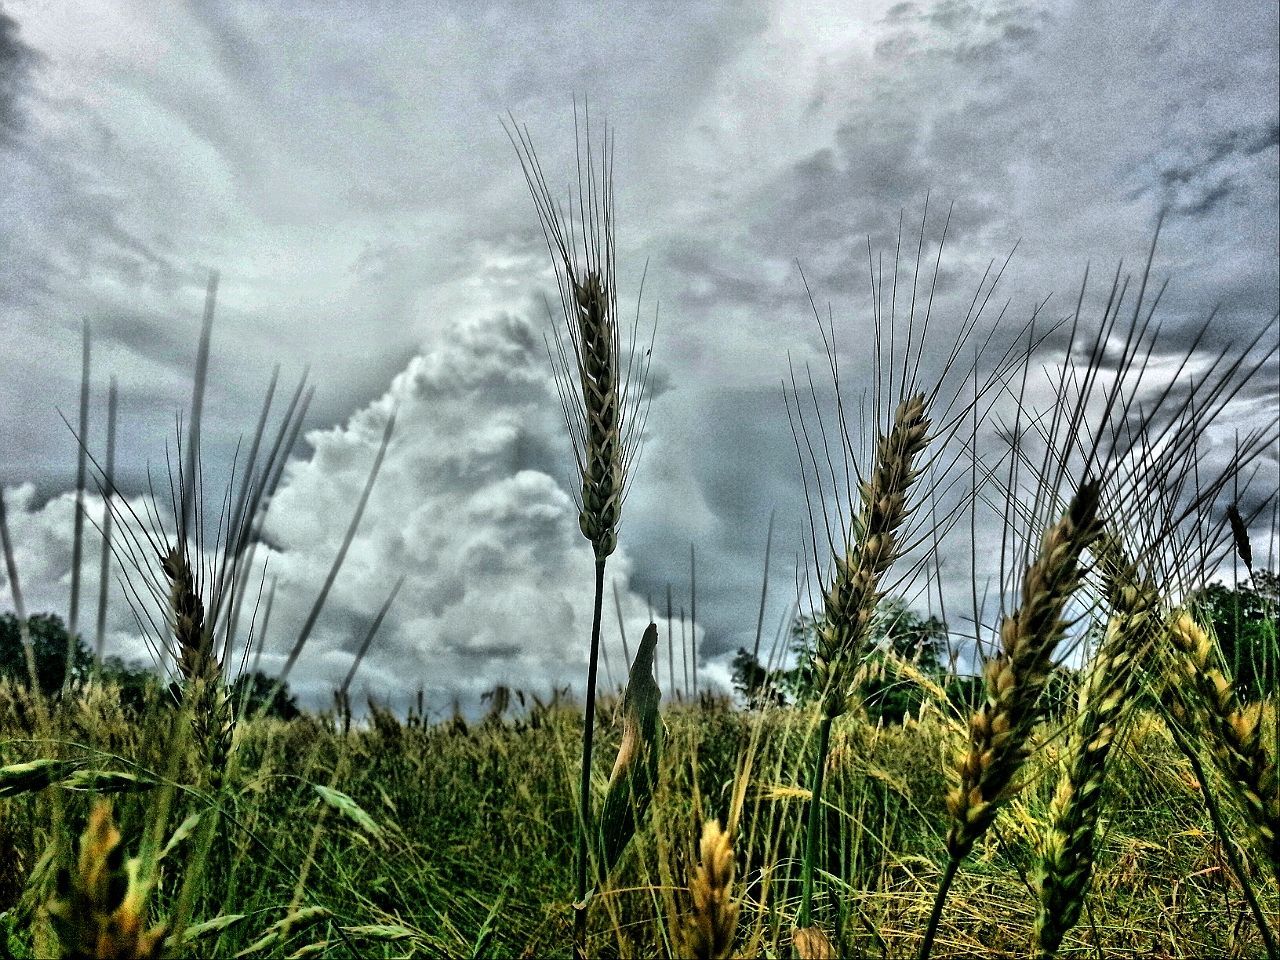 grass, growth, plant, sky, field, nature, cloud - sky, tranquility, growing, beauty in nature, tranquil scene, cloudy, reed - grass family, crop, scenics, cloud, day, water, outdoors, agriculture